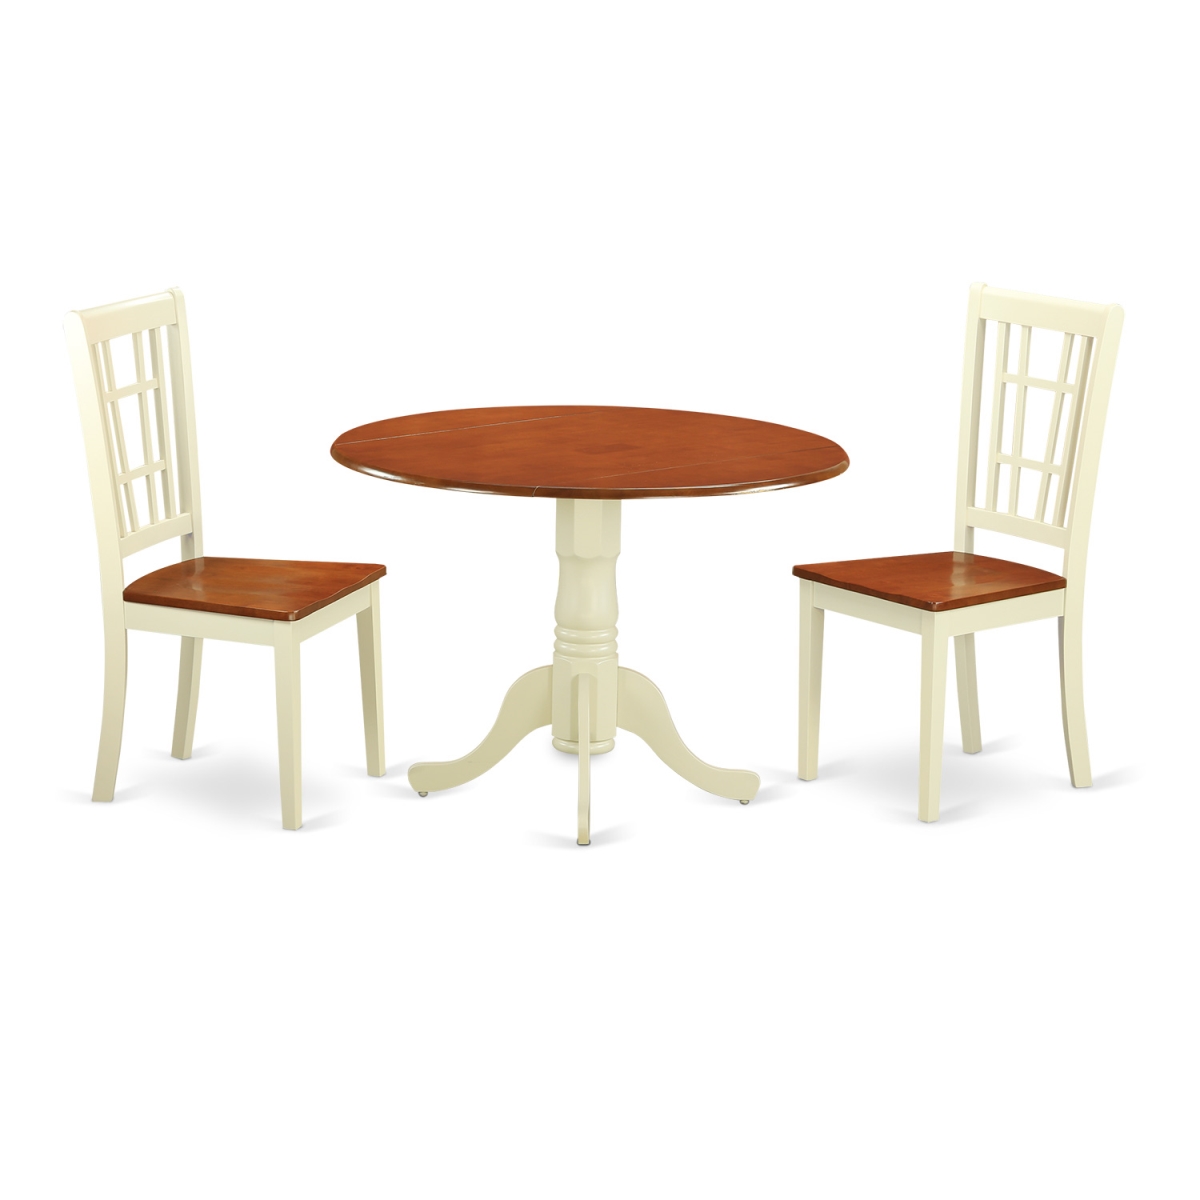 Dinette Set With 2 Table & 2 Chairs, Buttermilk & Cherry - 3 Piece